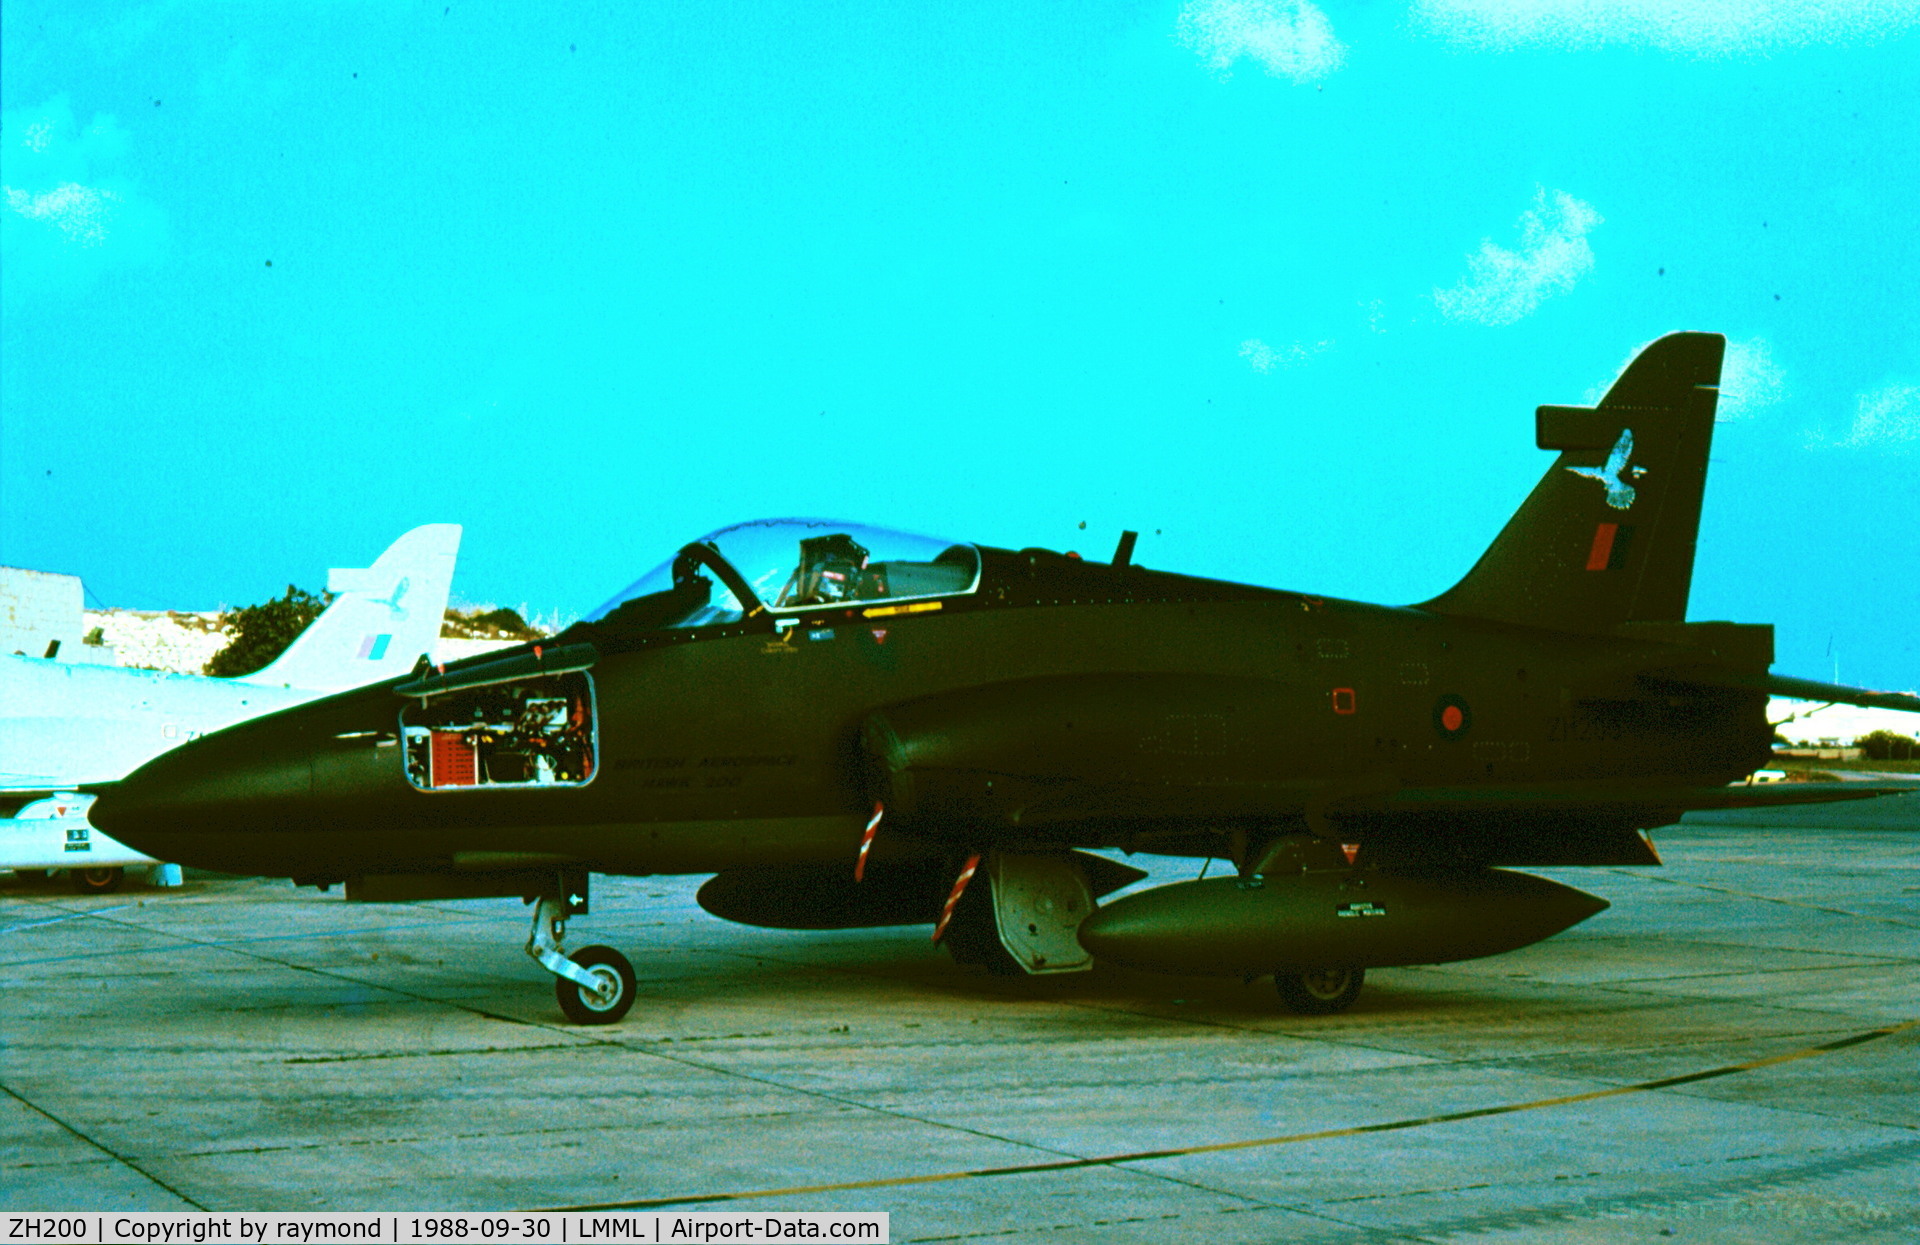 ZH200, 1987 British Aerospace Hawk 200 C/N 356, Hawk200 ZH200 passed through Malta on its way
to Australia for a demonstration flight for the Royal
Australian Air Force.